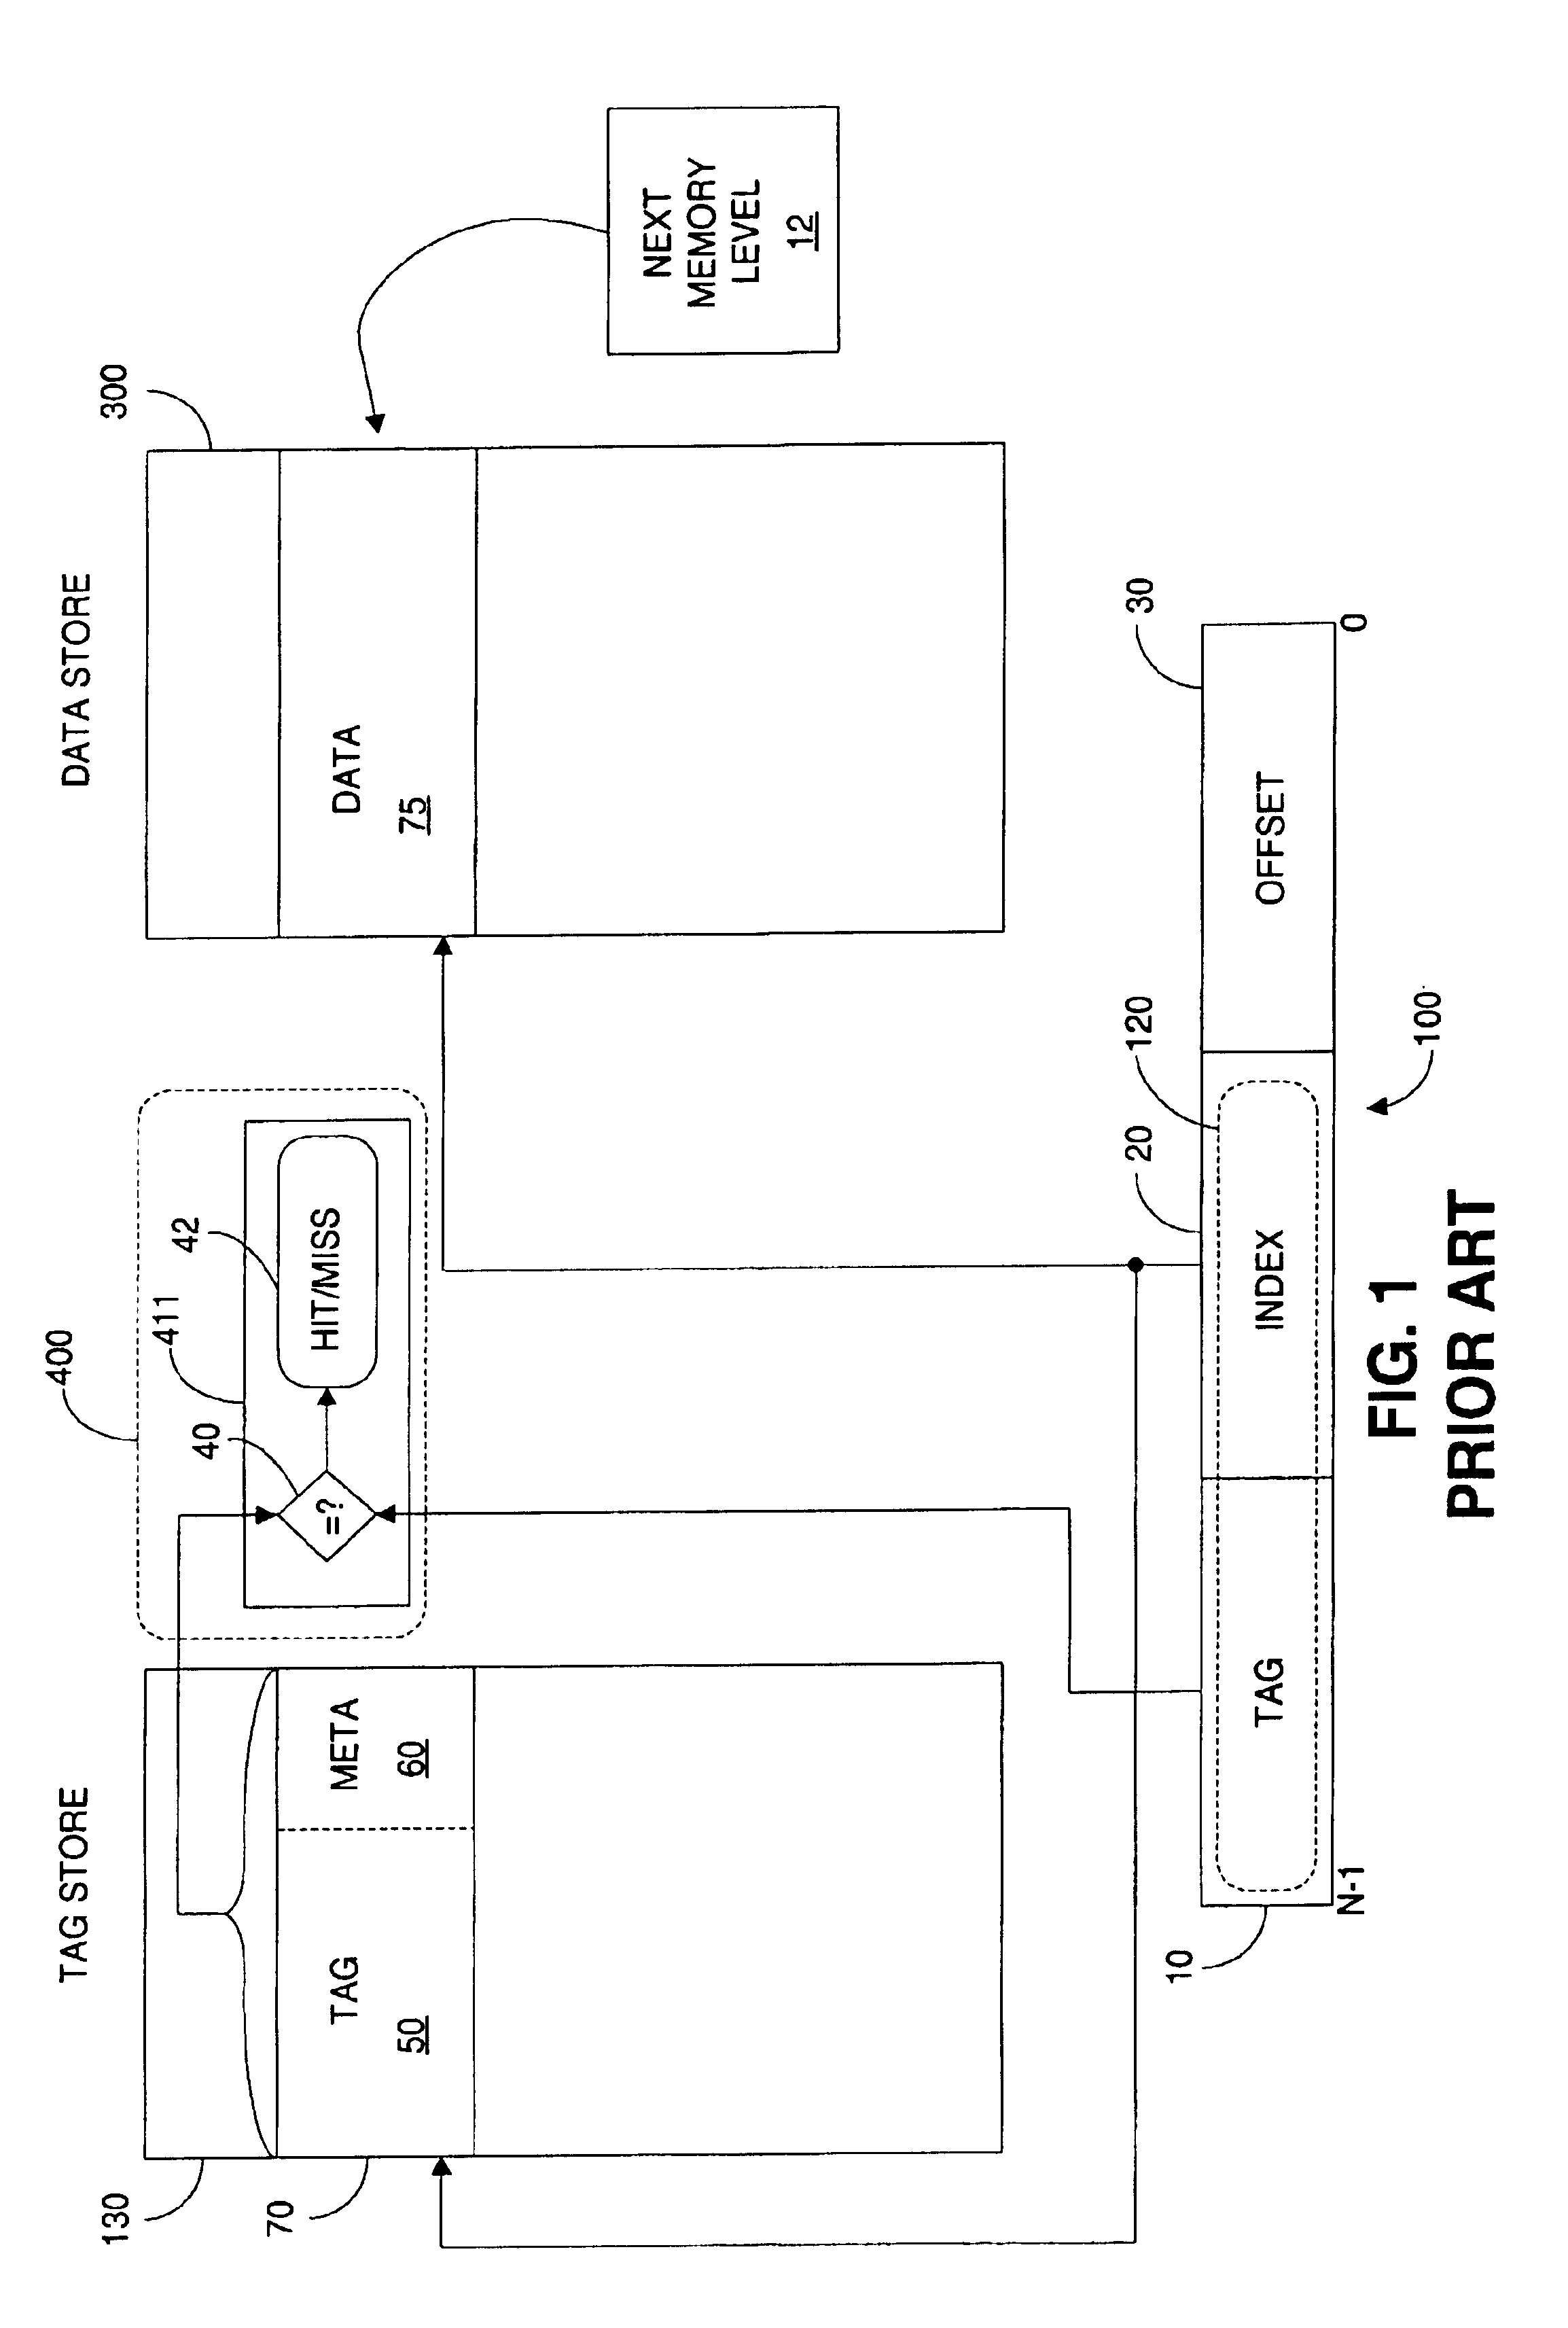 N-way set-associative external cache with standard DDR memory devices